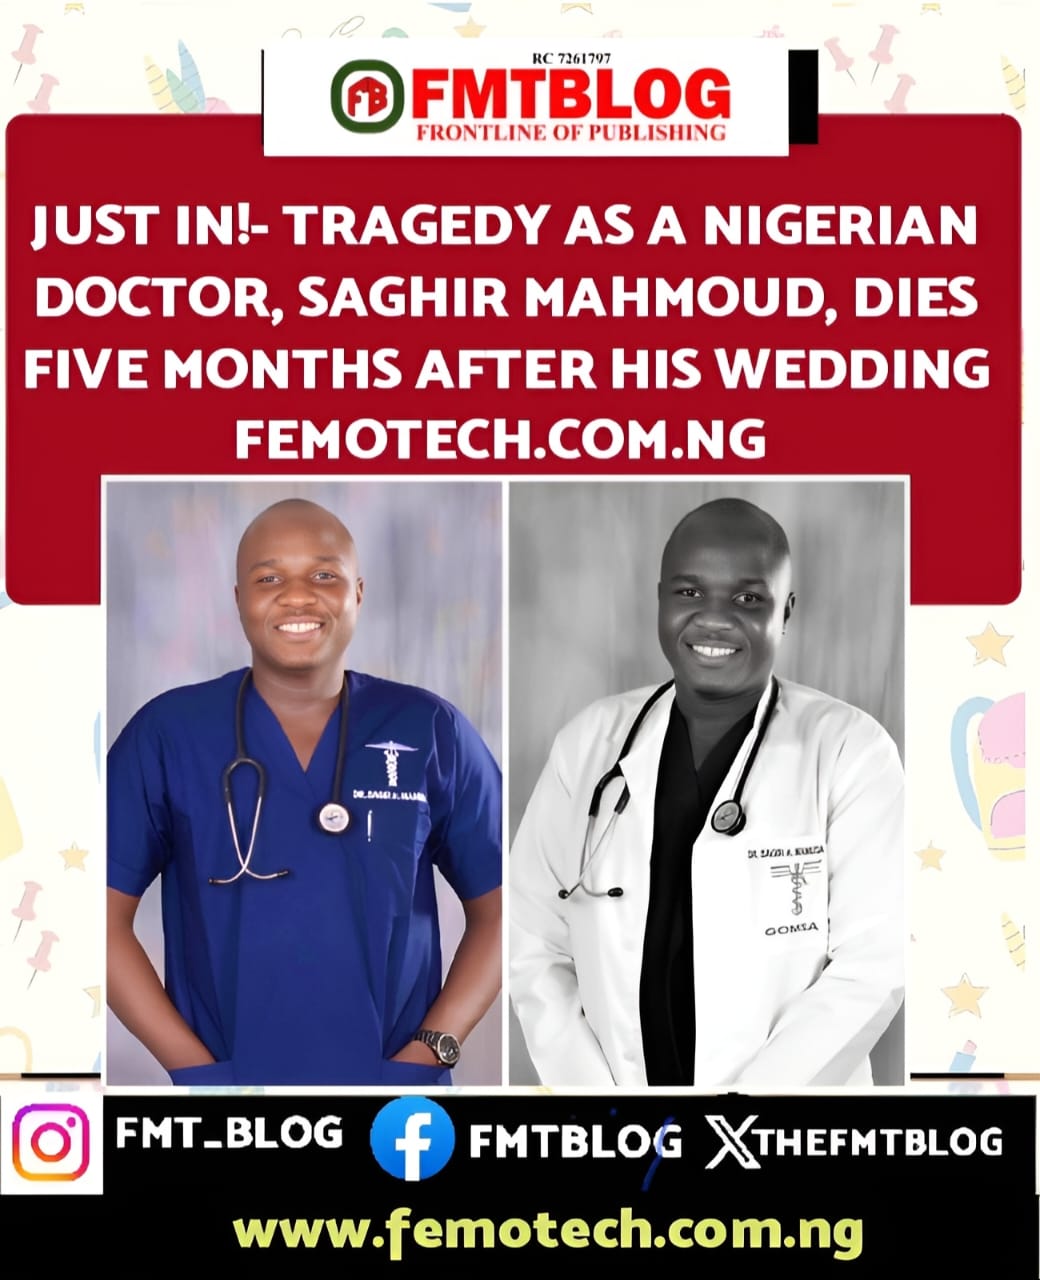 JUST IN!- Tragedy As Nigerian Doctor, Saghir Mahmoud, Dies Five Months After His Wedding